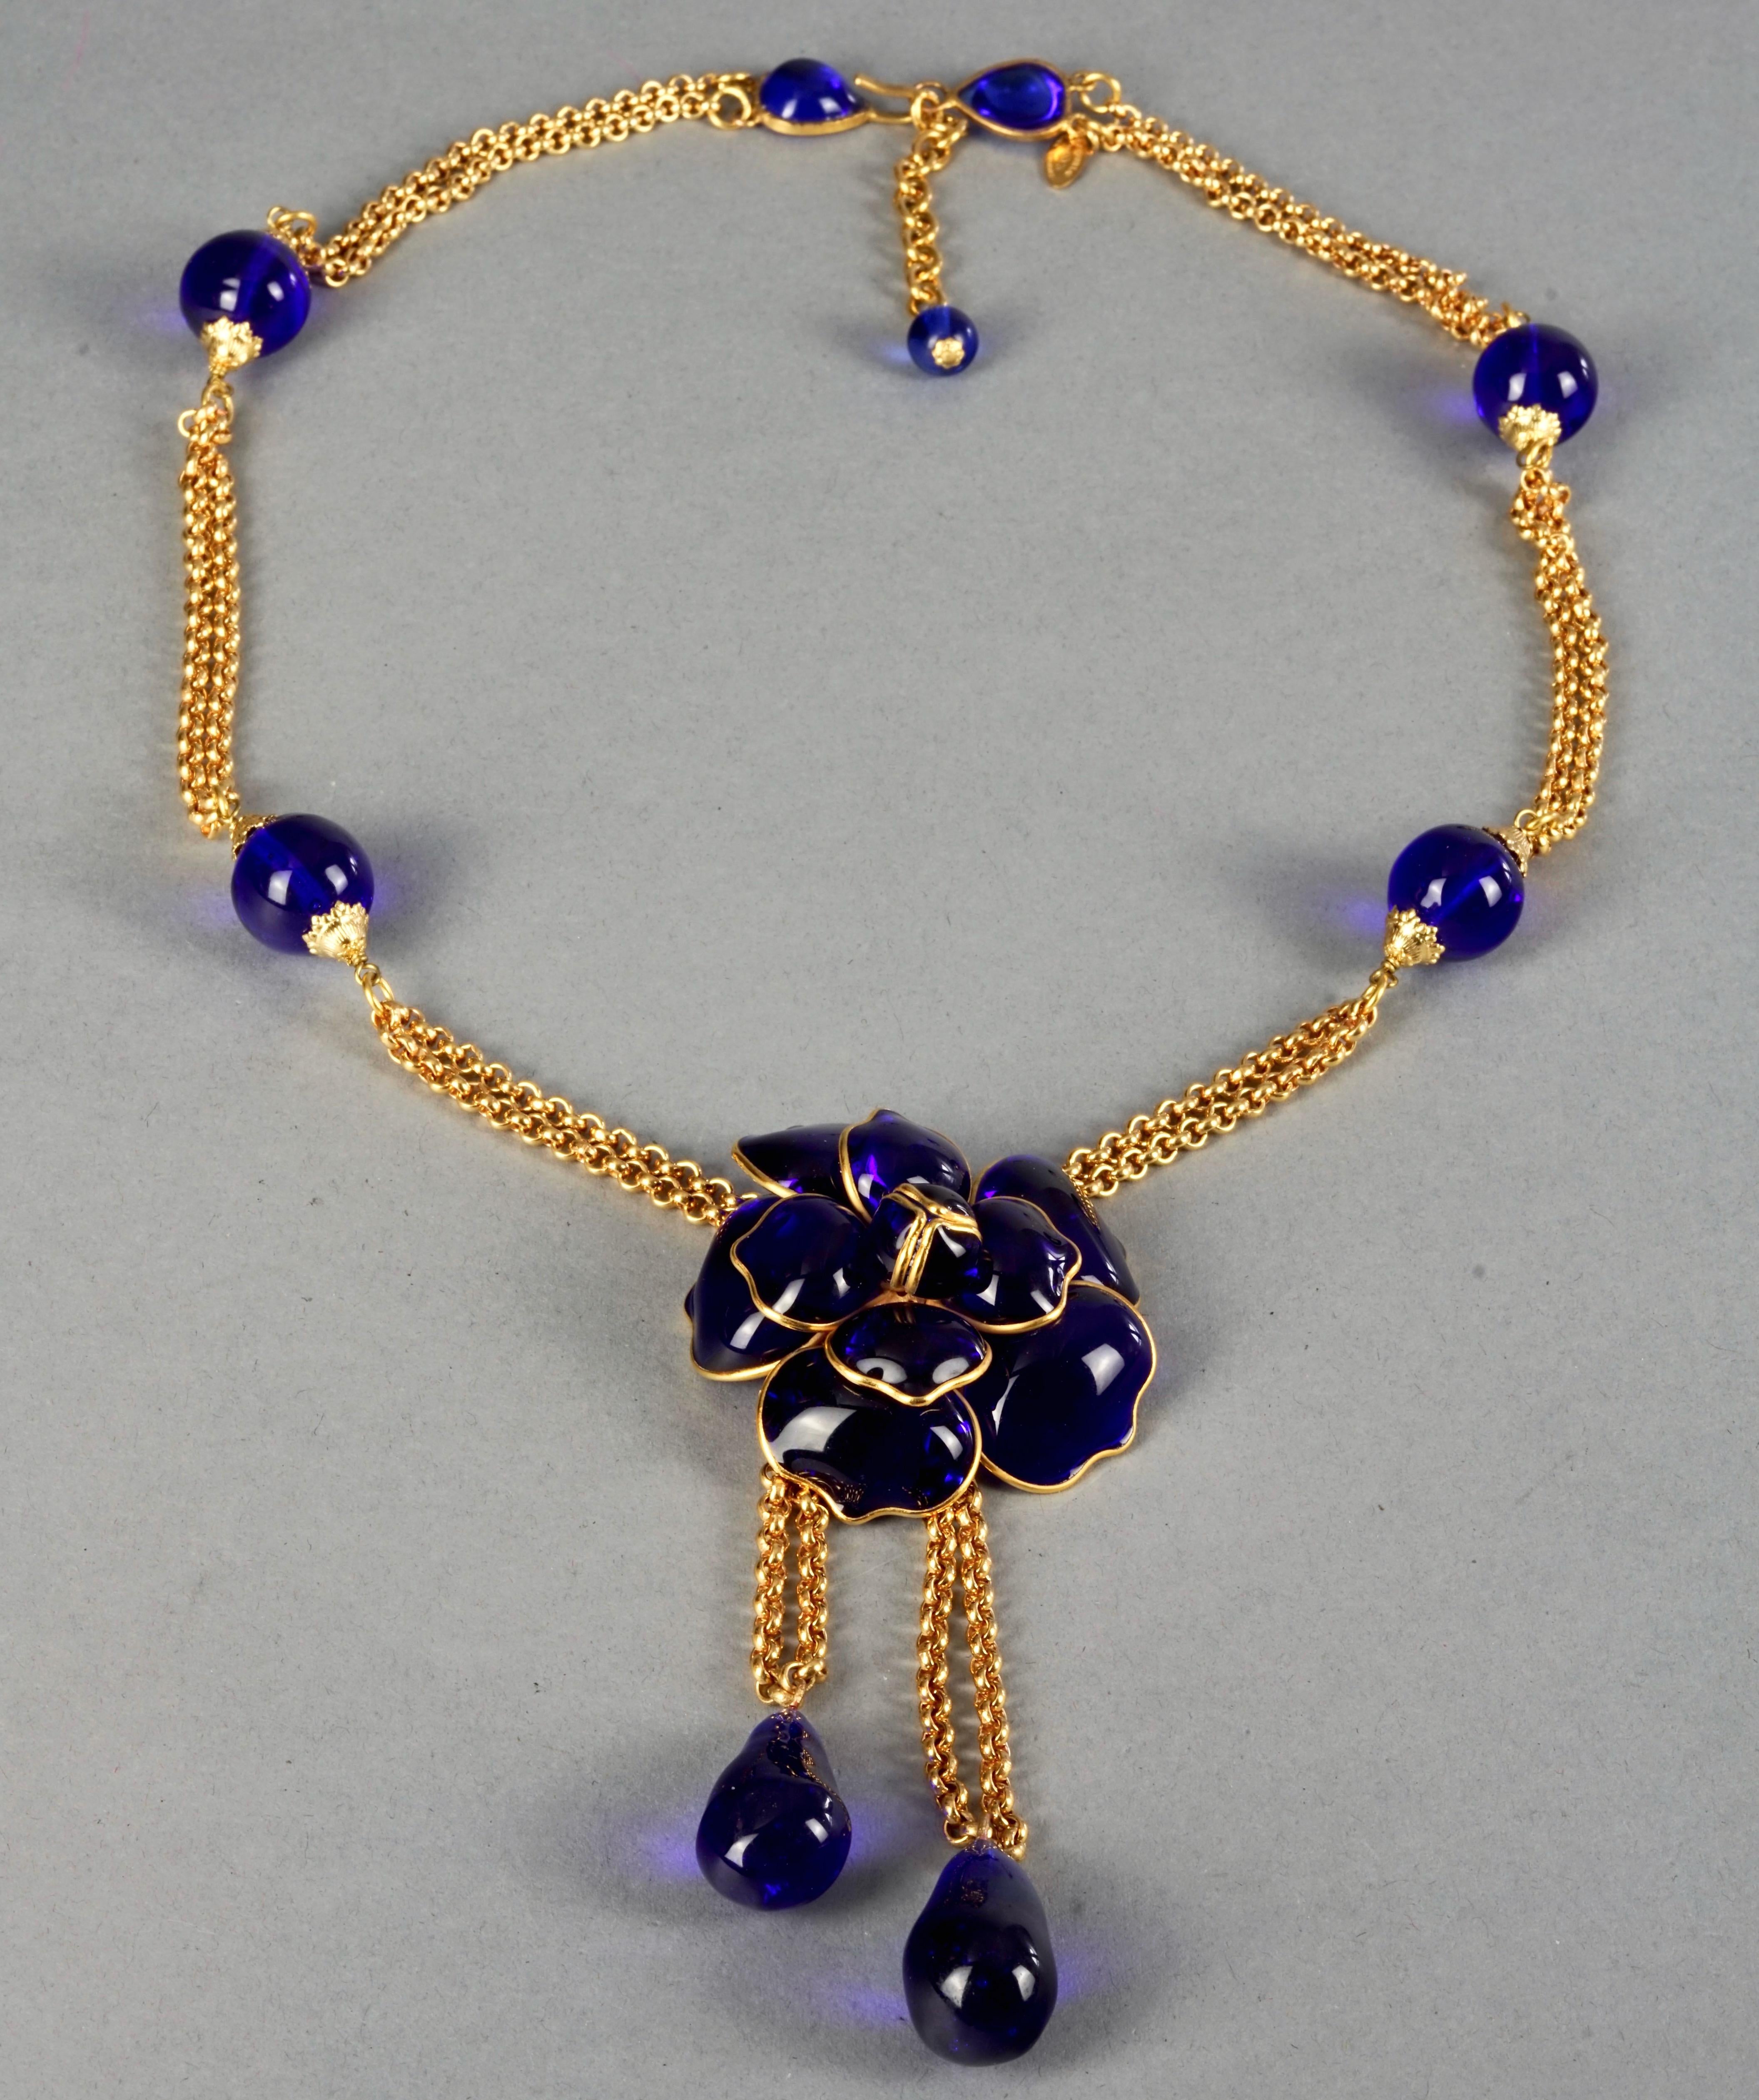 Vintage CHANEL GRIPOIX Blue Camellia Flower Multi Chain Necklace In Excellent Condition For Sale In Kingersheim, Alsace